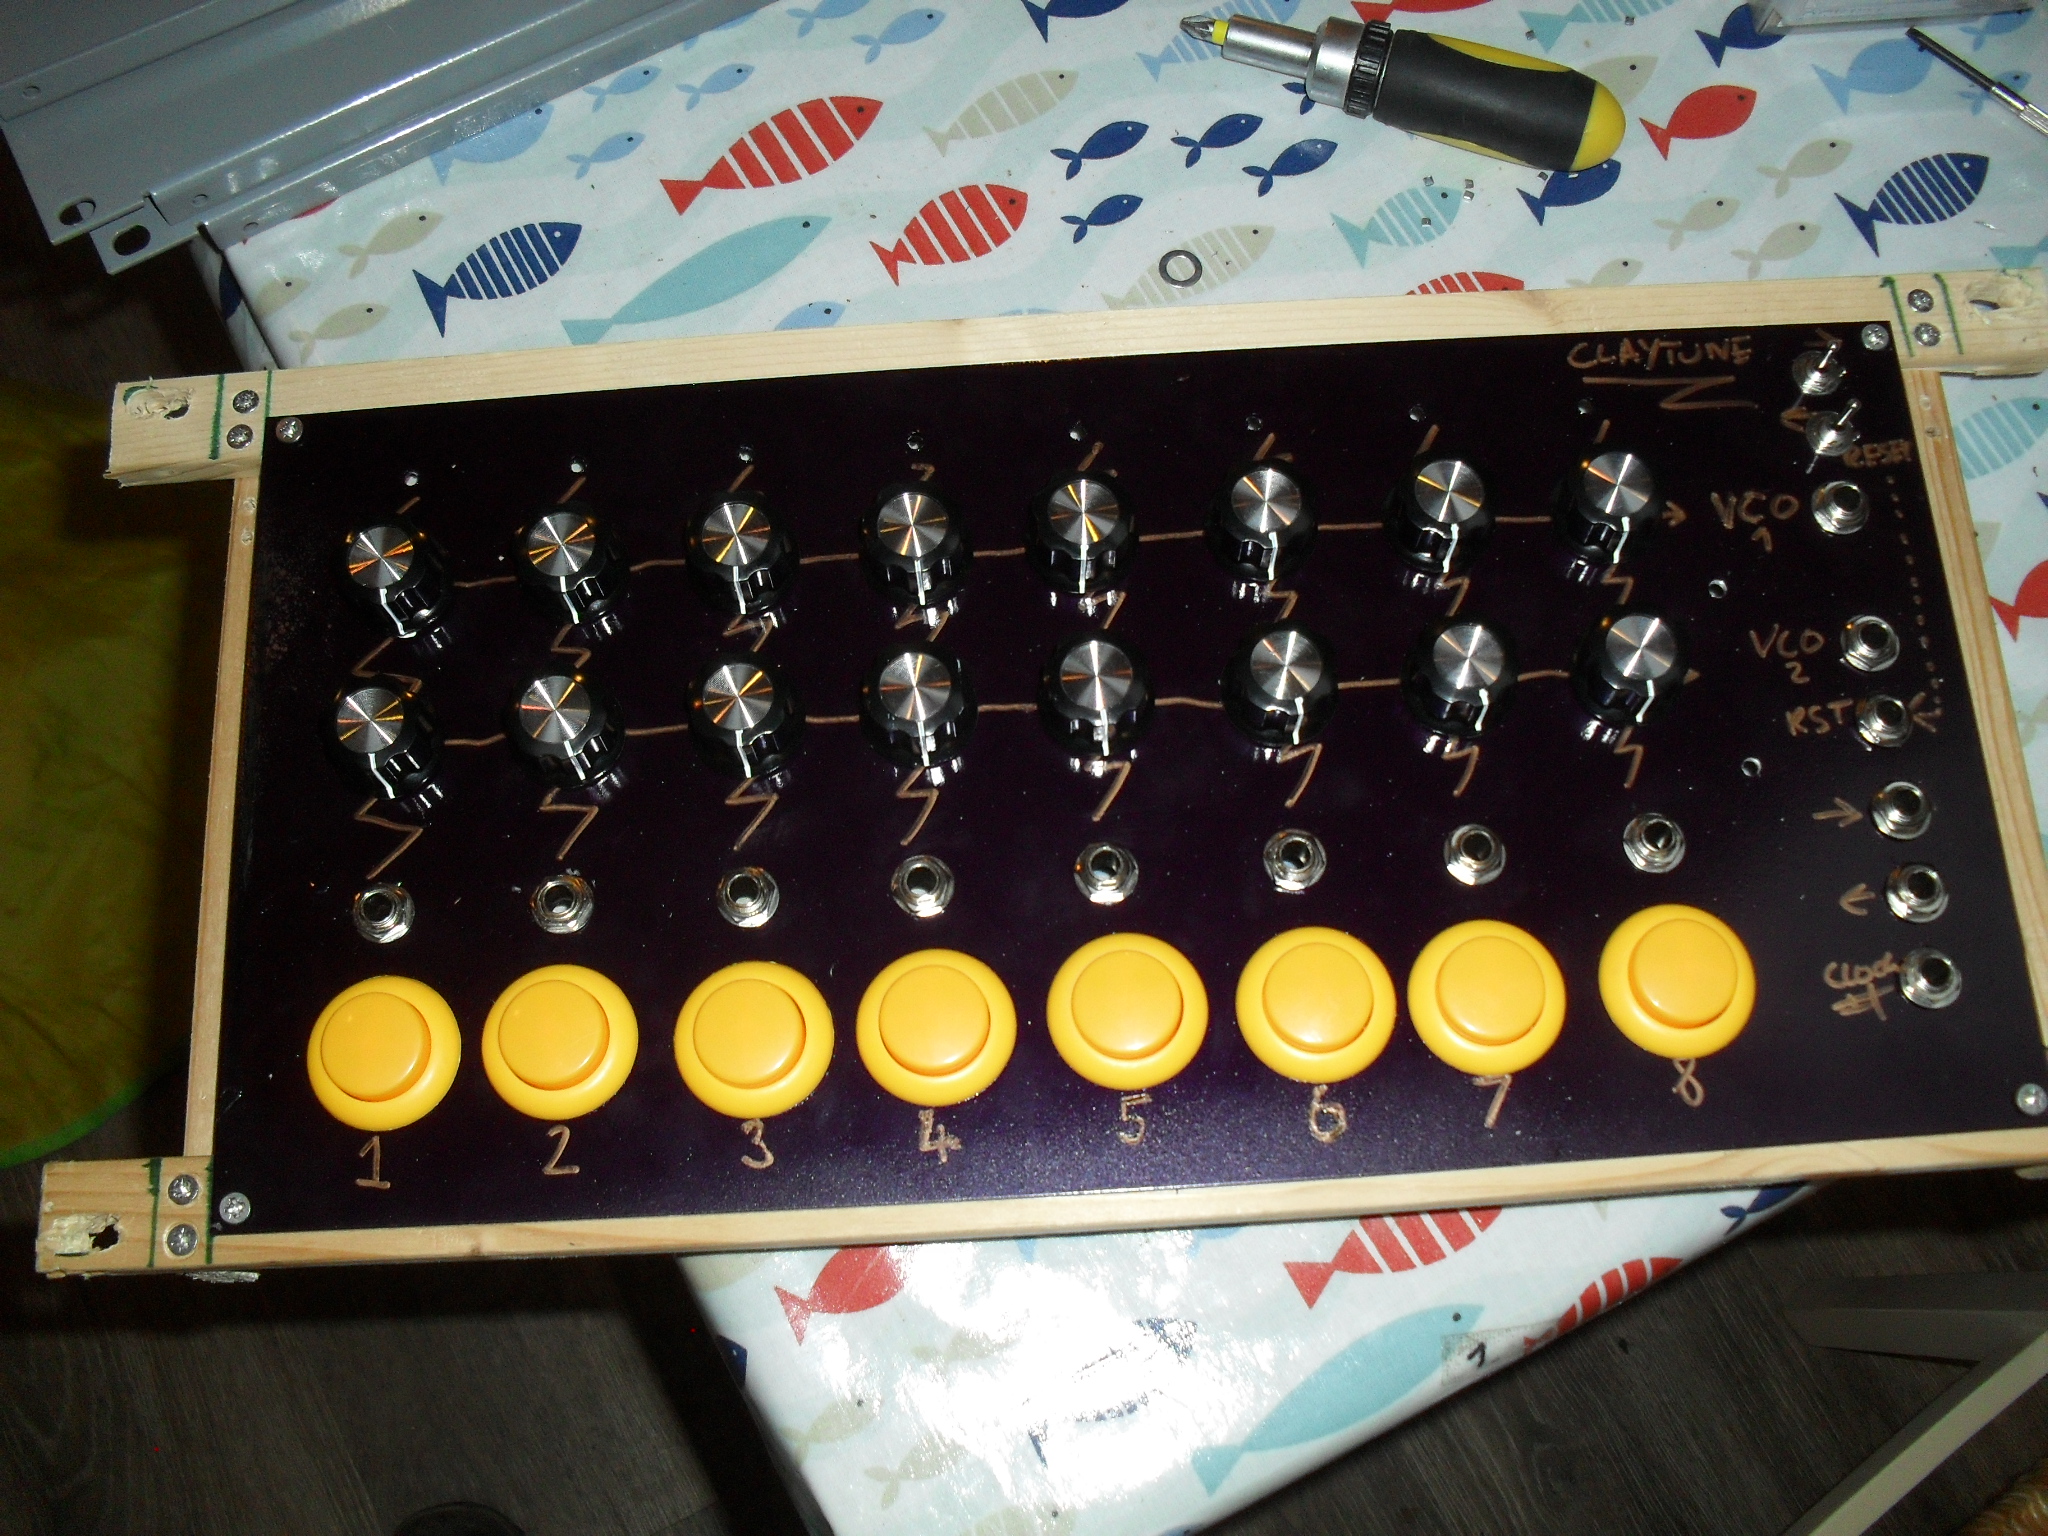 Modular Synth Build #1 – 8 Step Sequencer.